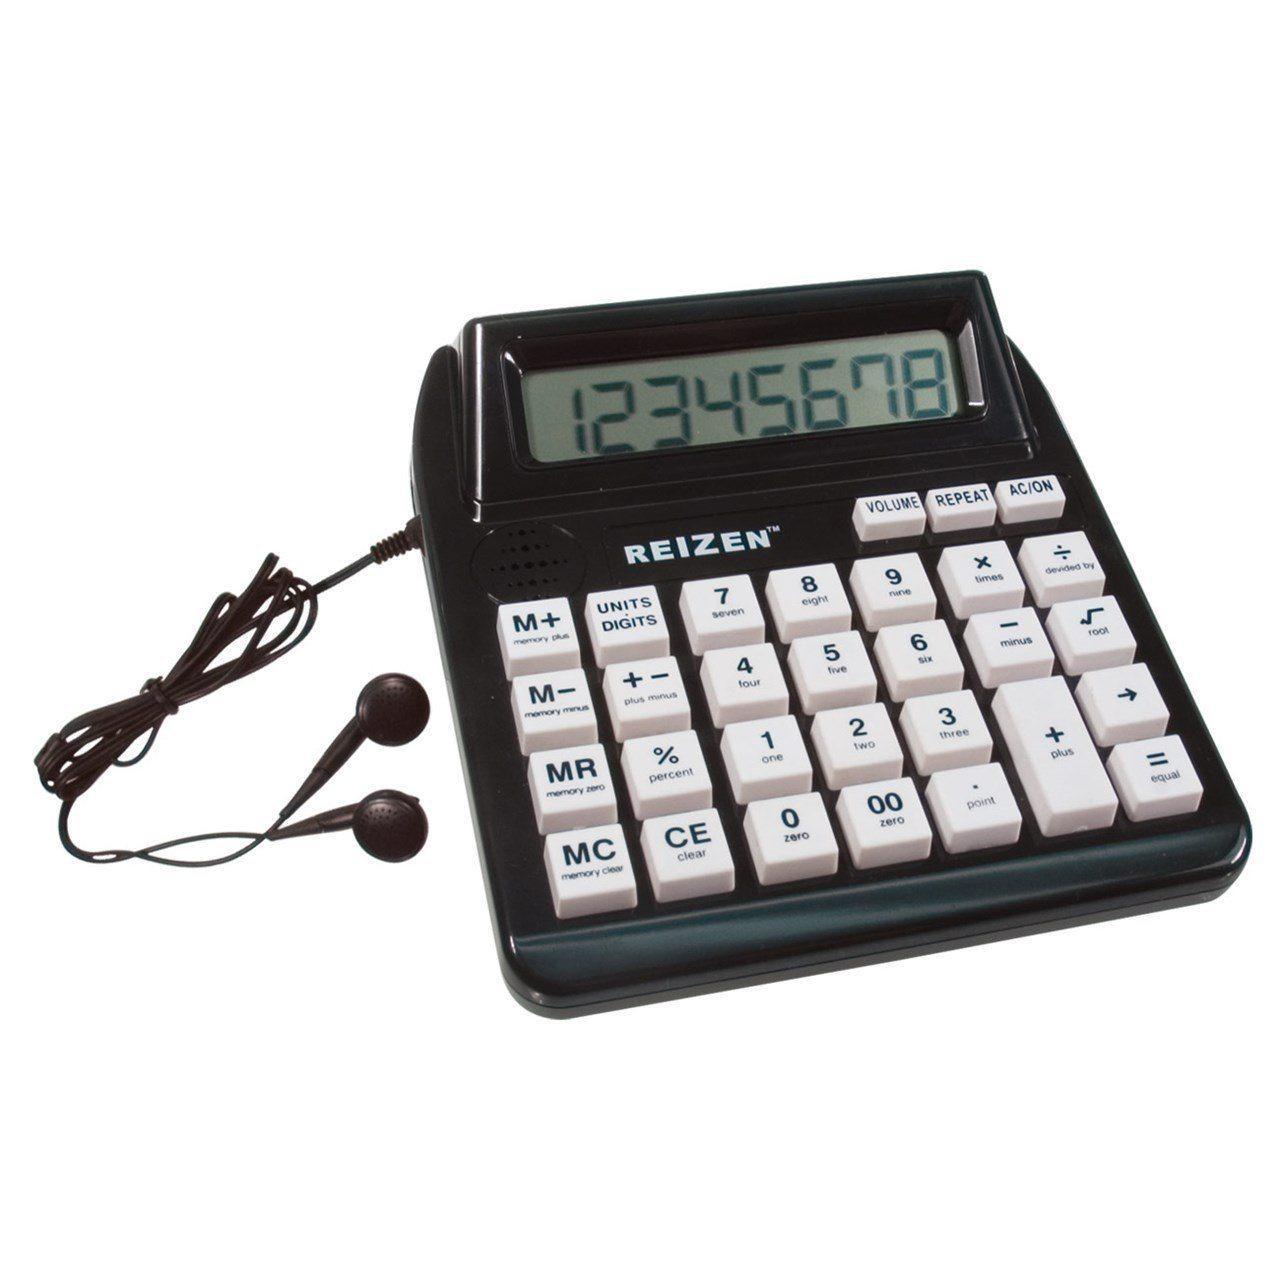 Talking Calculator with Repeat Key- English - The Low Vision Store